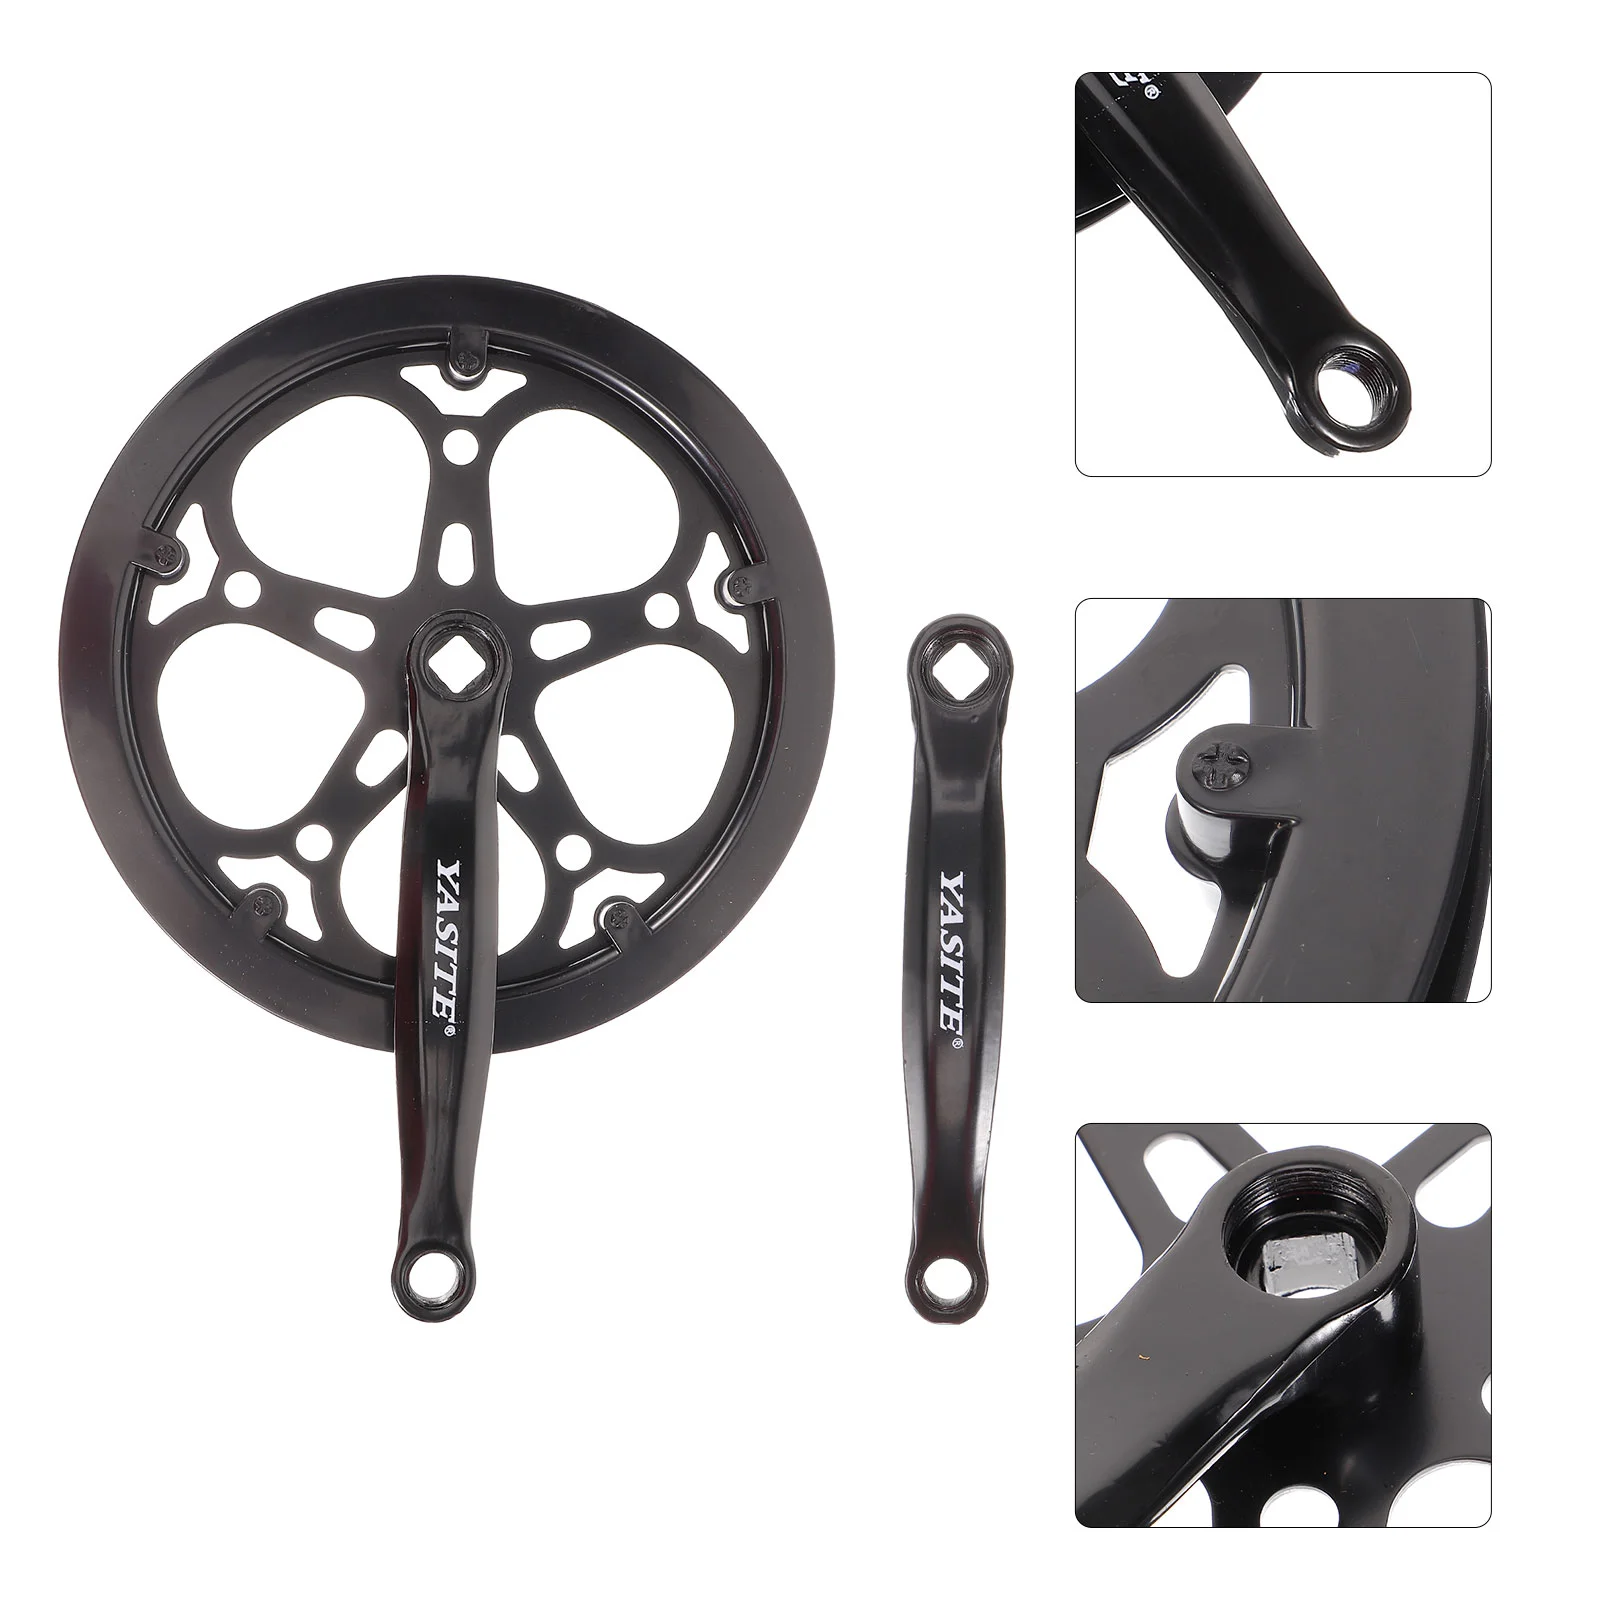 

Bicycle Crankset Bike Replacement Accessories for Mountain Aluminum Sprocket Gear Single Ring Speeds Hollow Bikes